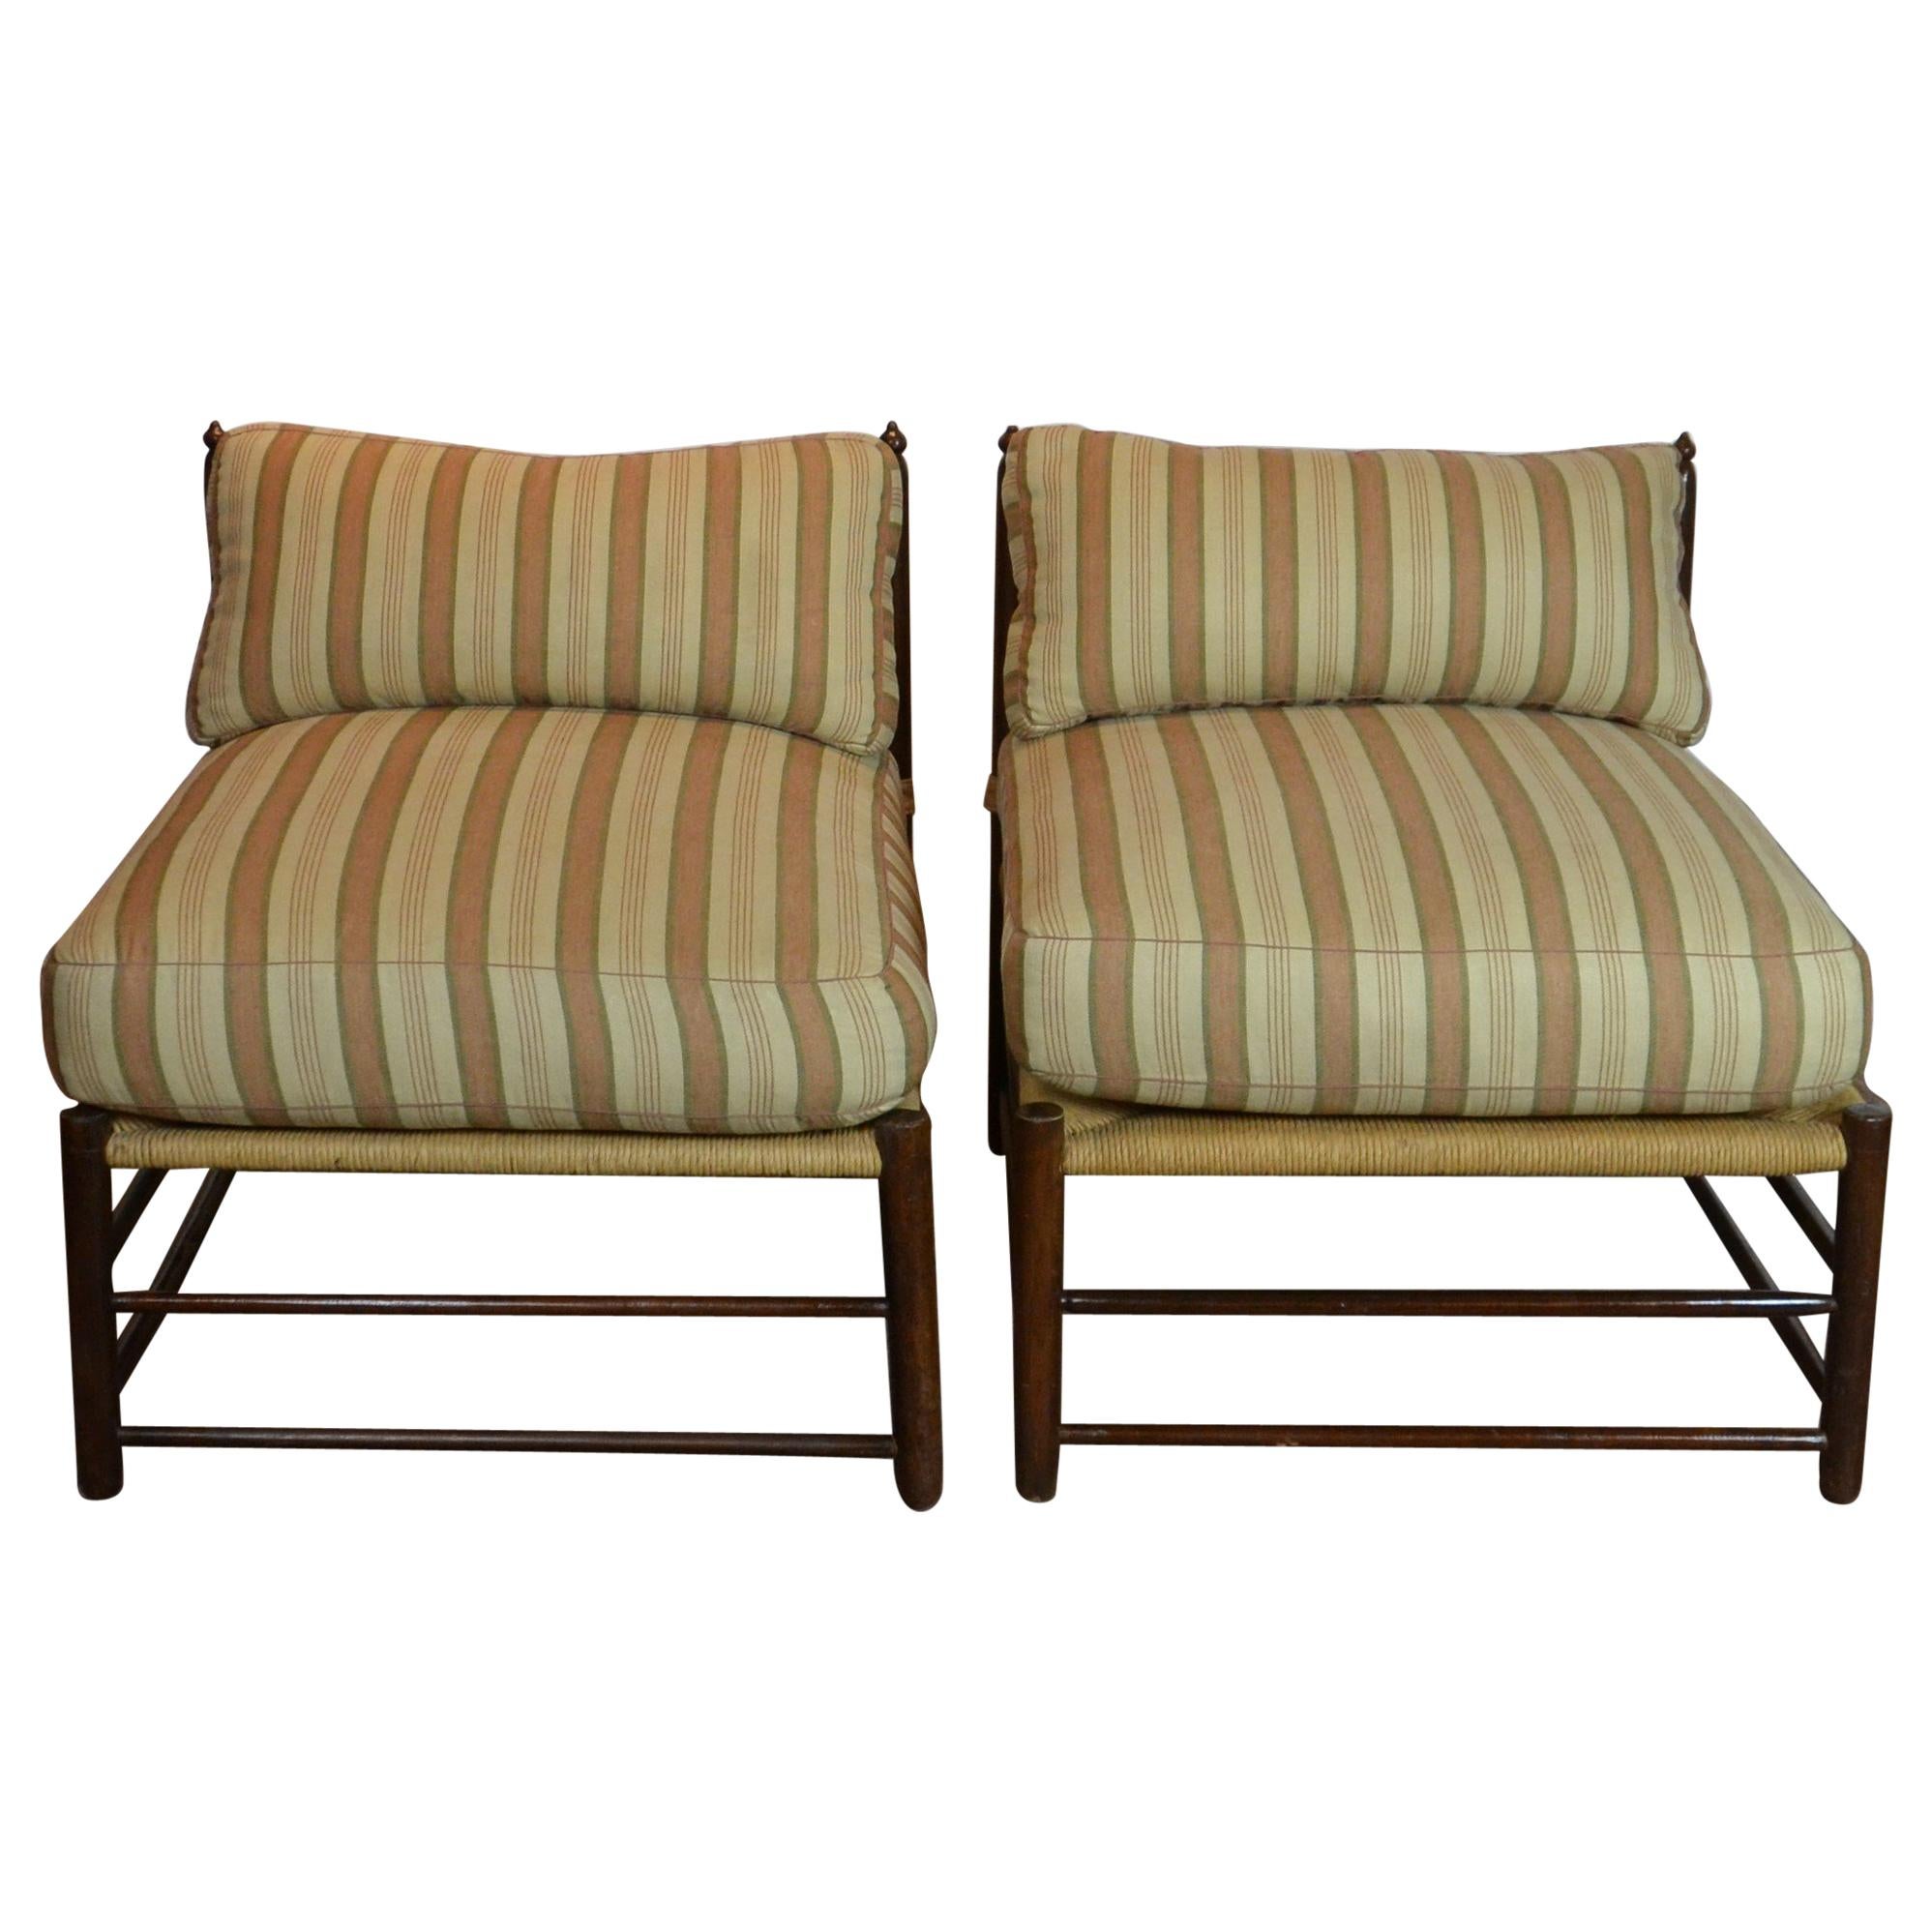 Woven Seat Club Chairs